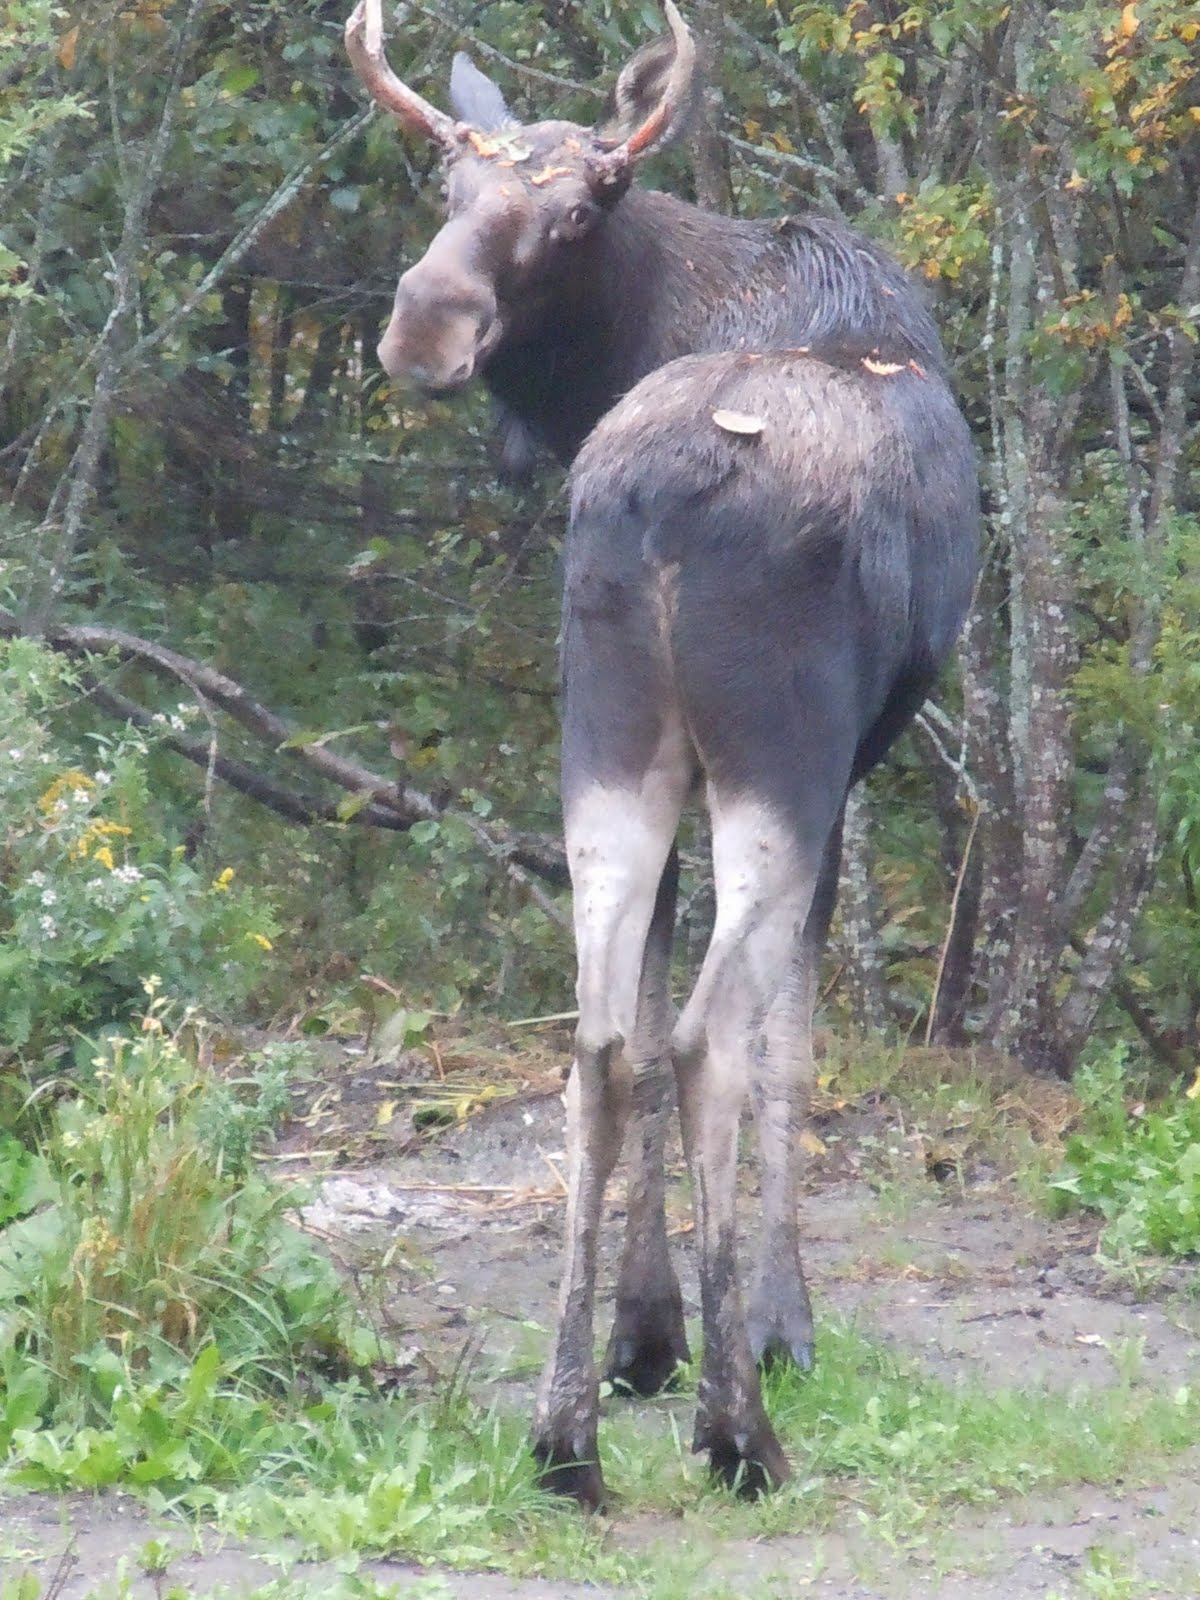 Do moose have tails?